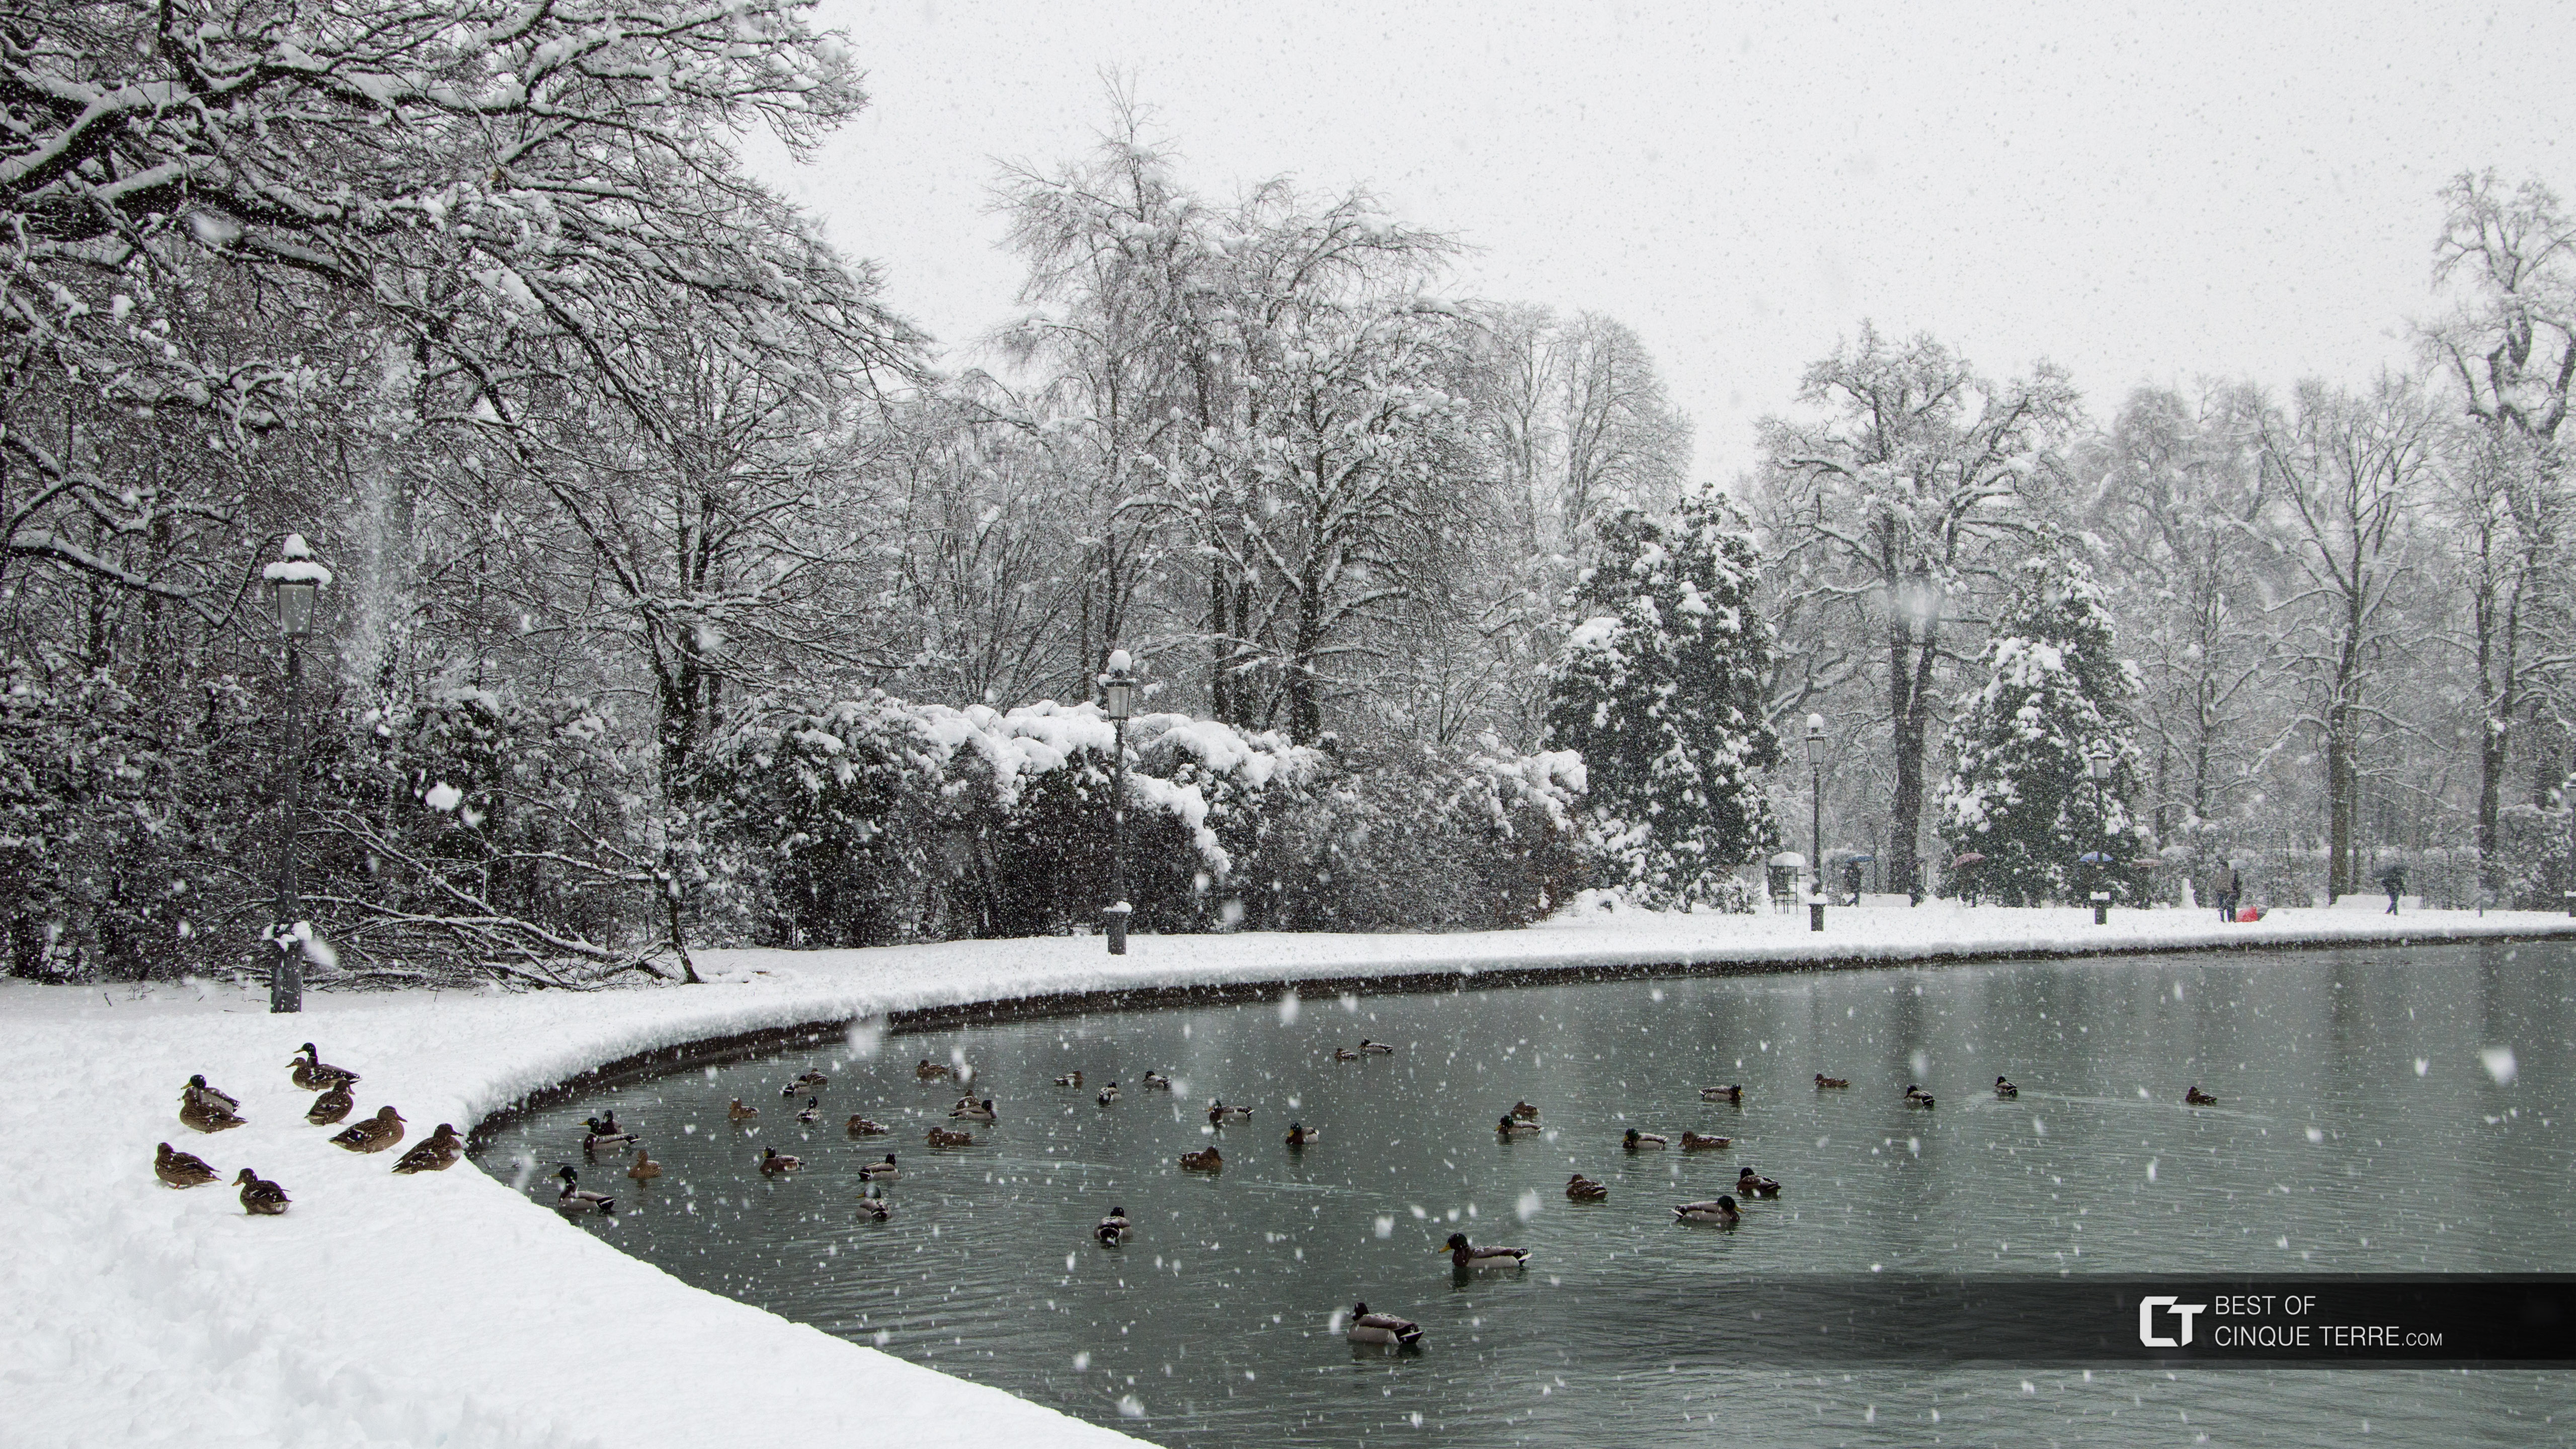 Lake in the Ducal Park in the snow, an unusual occurrence, Parma, Italy